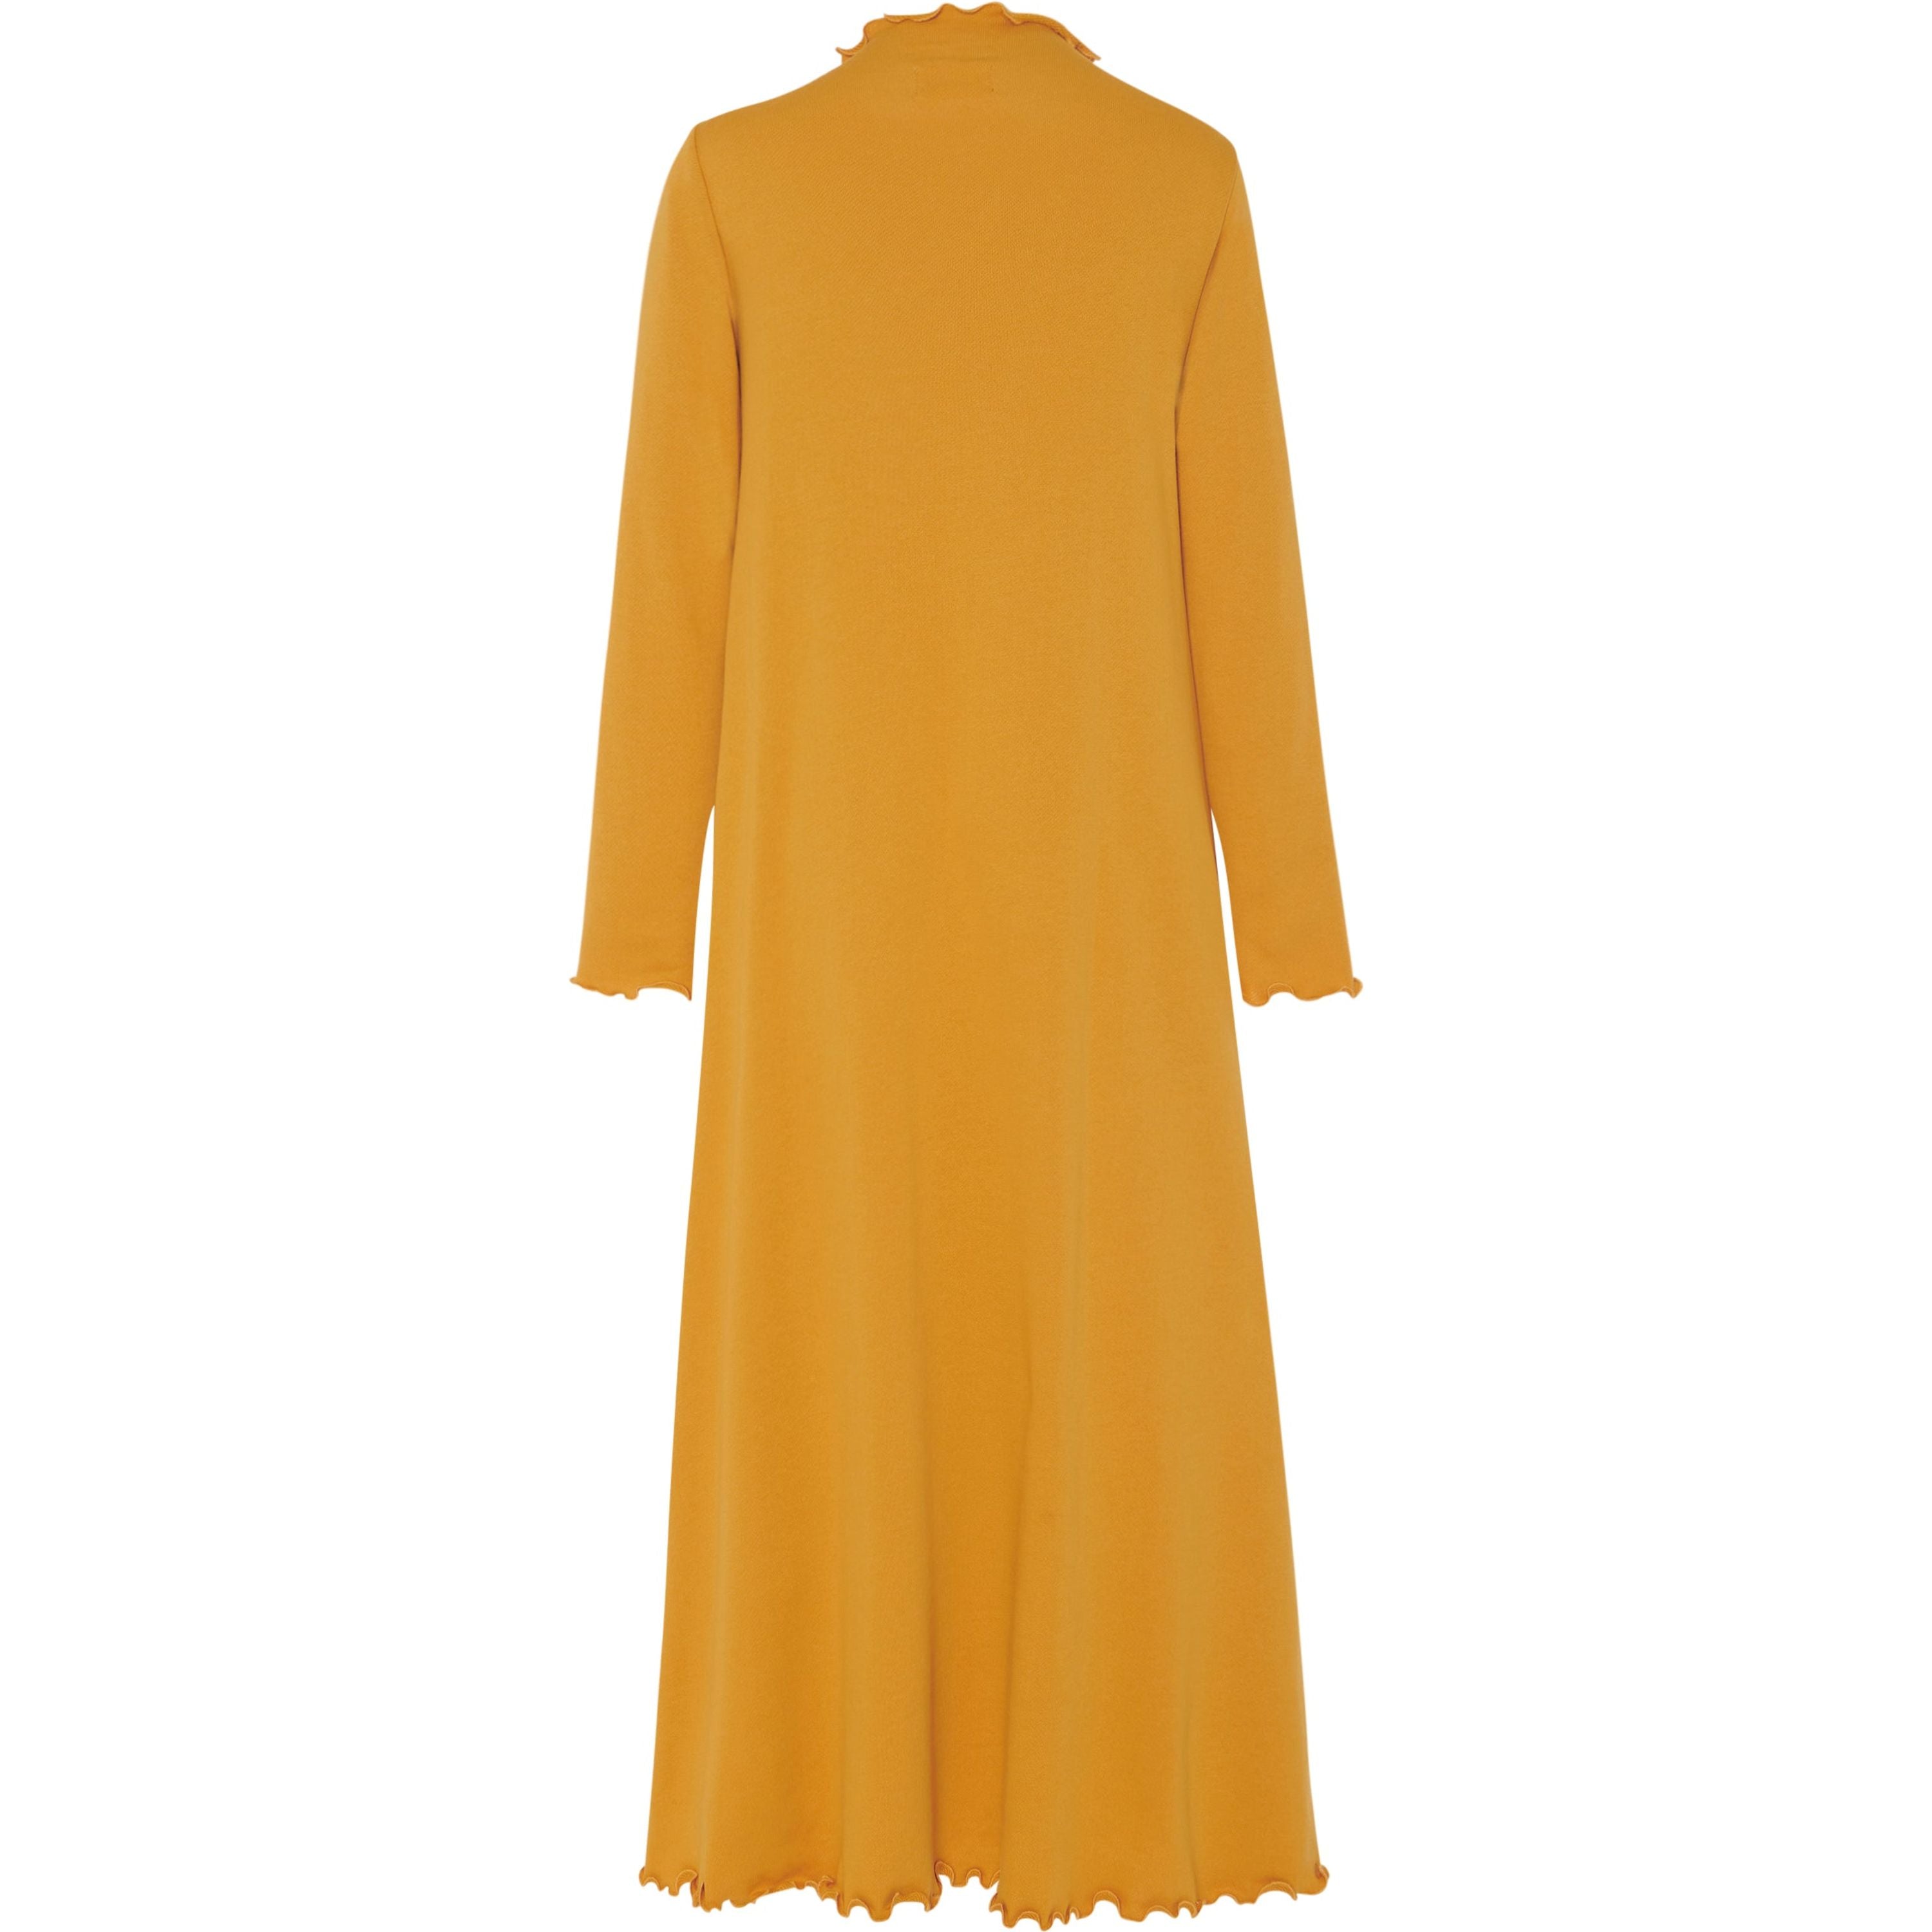 Women's Lounge Dress in Marigold French Terry by Casey Marks